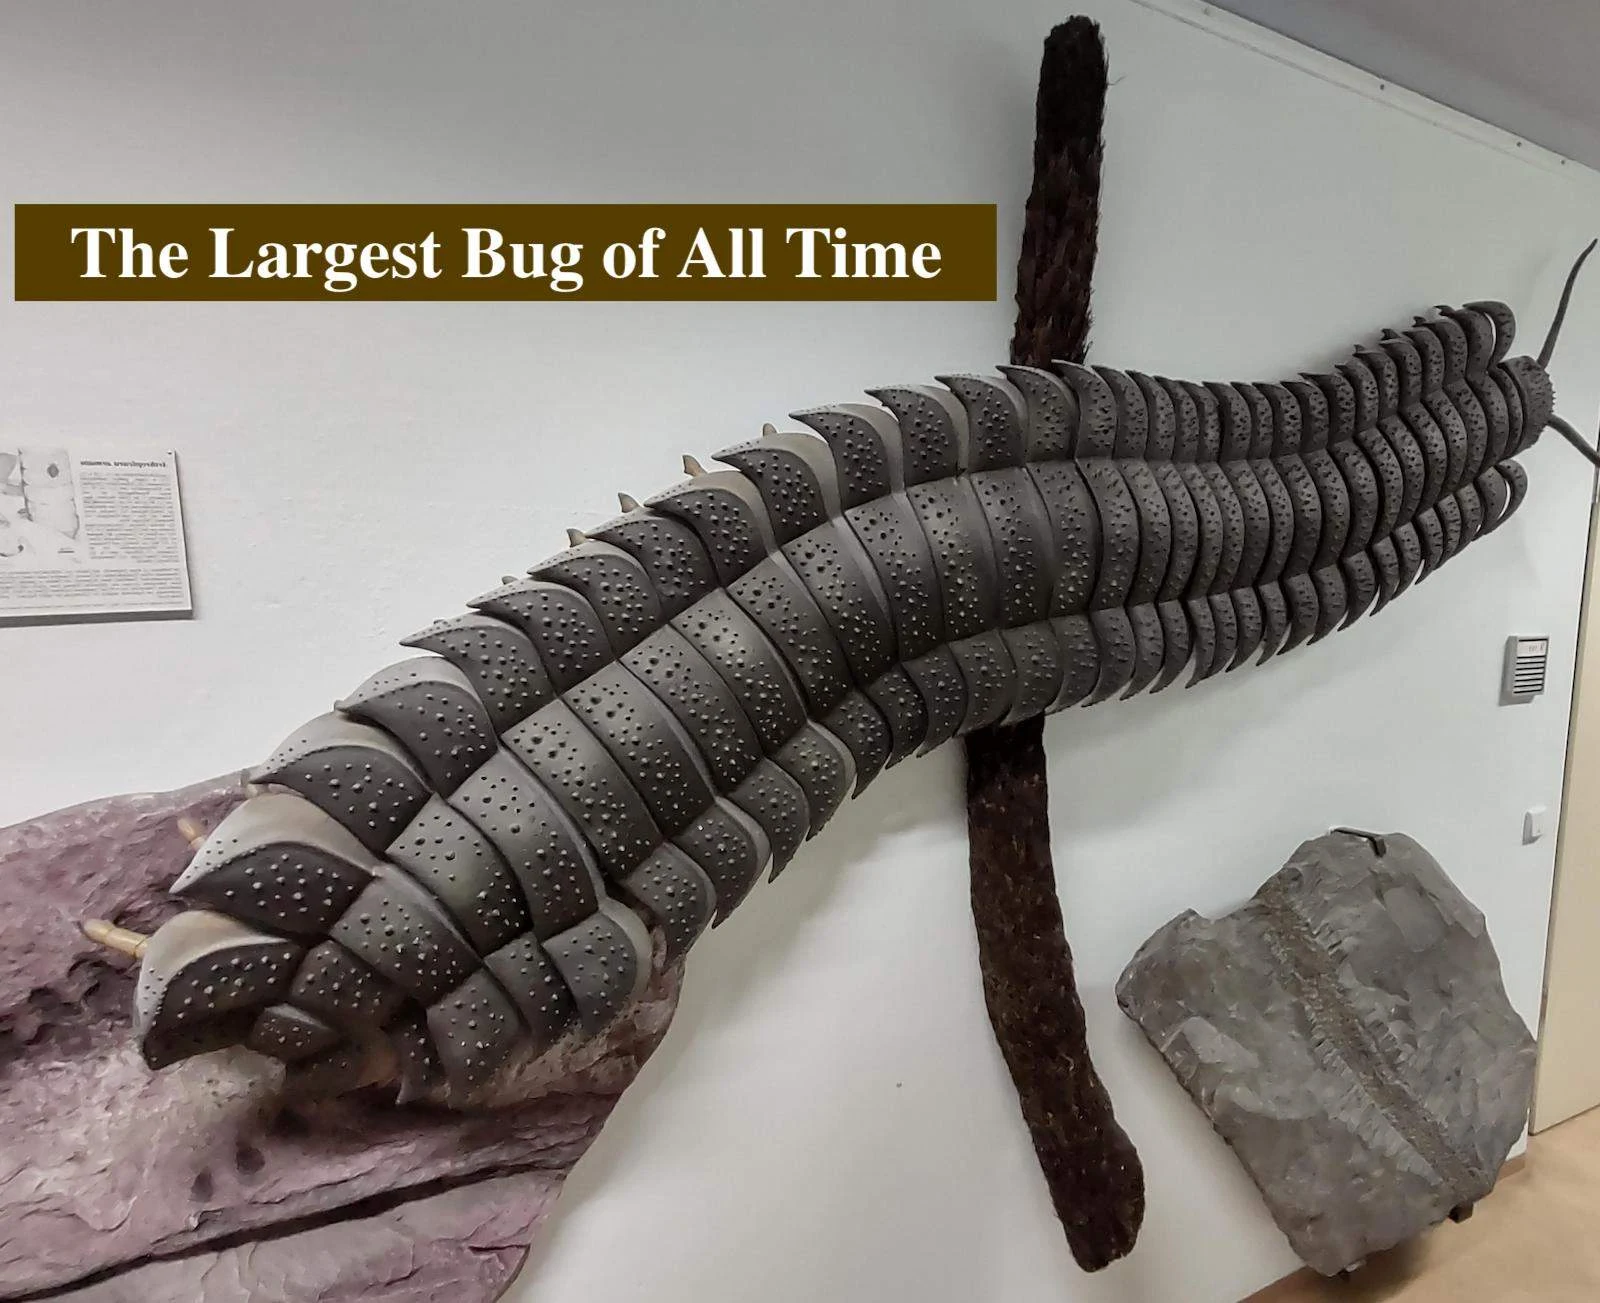 The Largest Bug of All Time